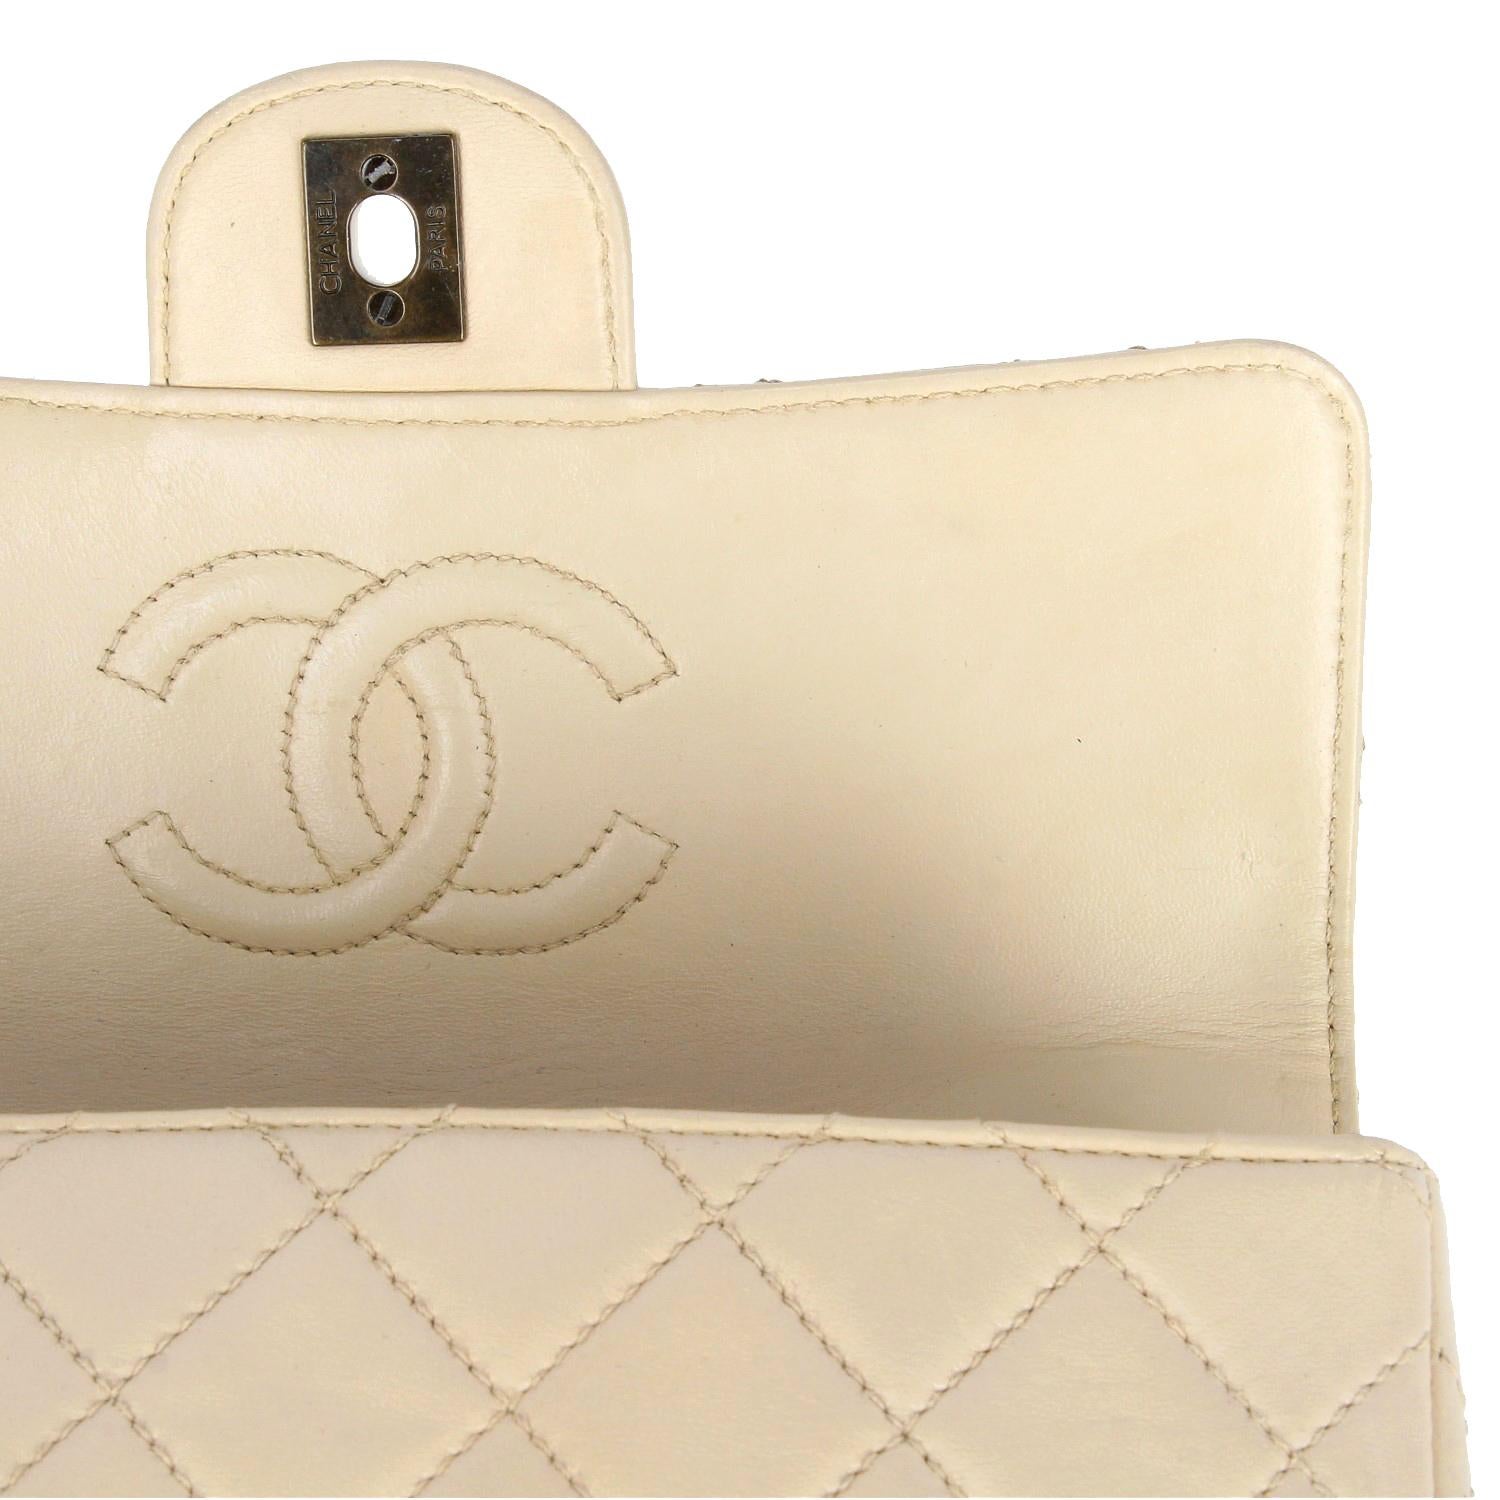 1990s Chanel beige leather bag  8